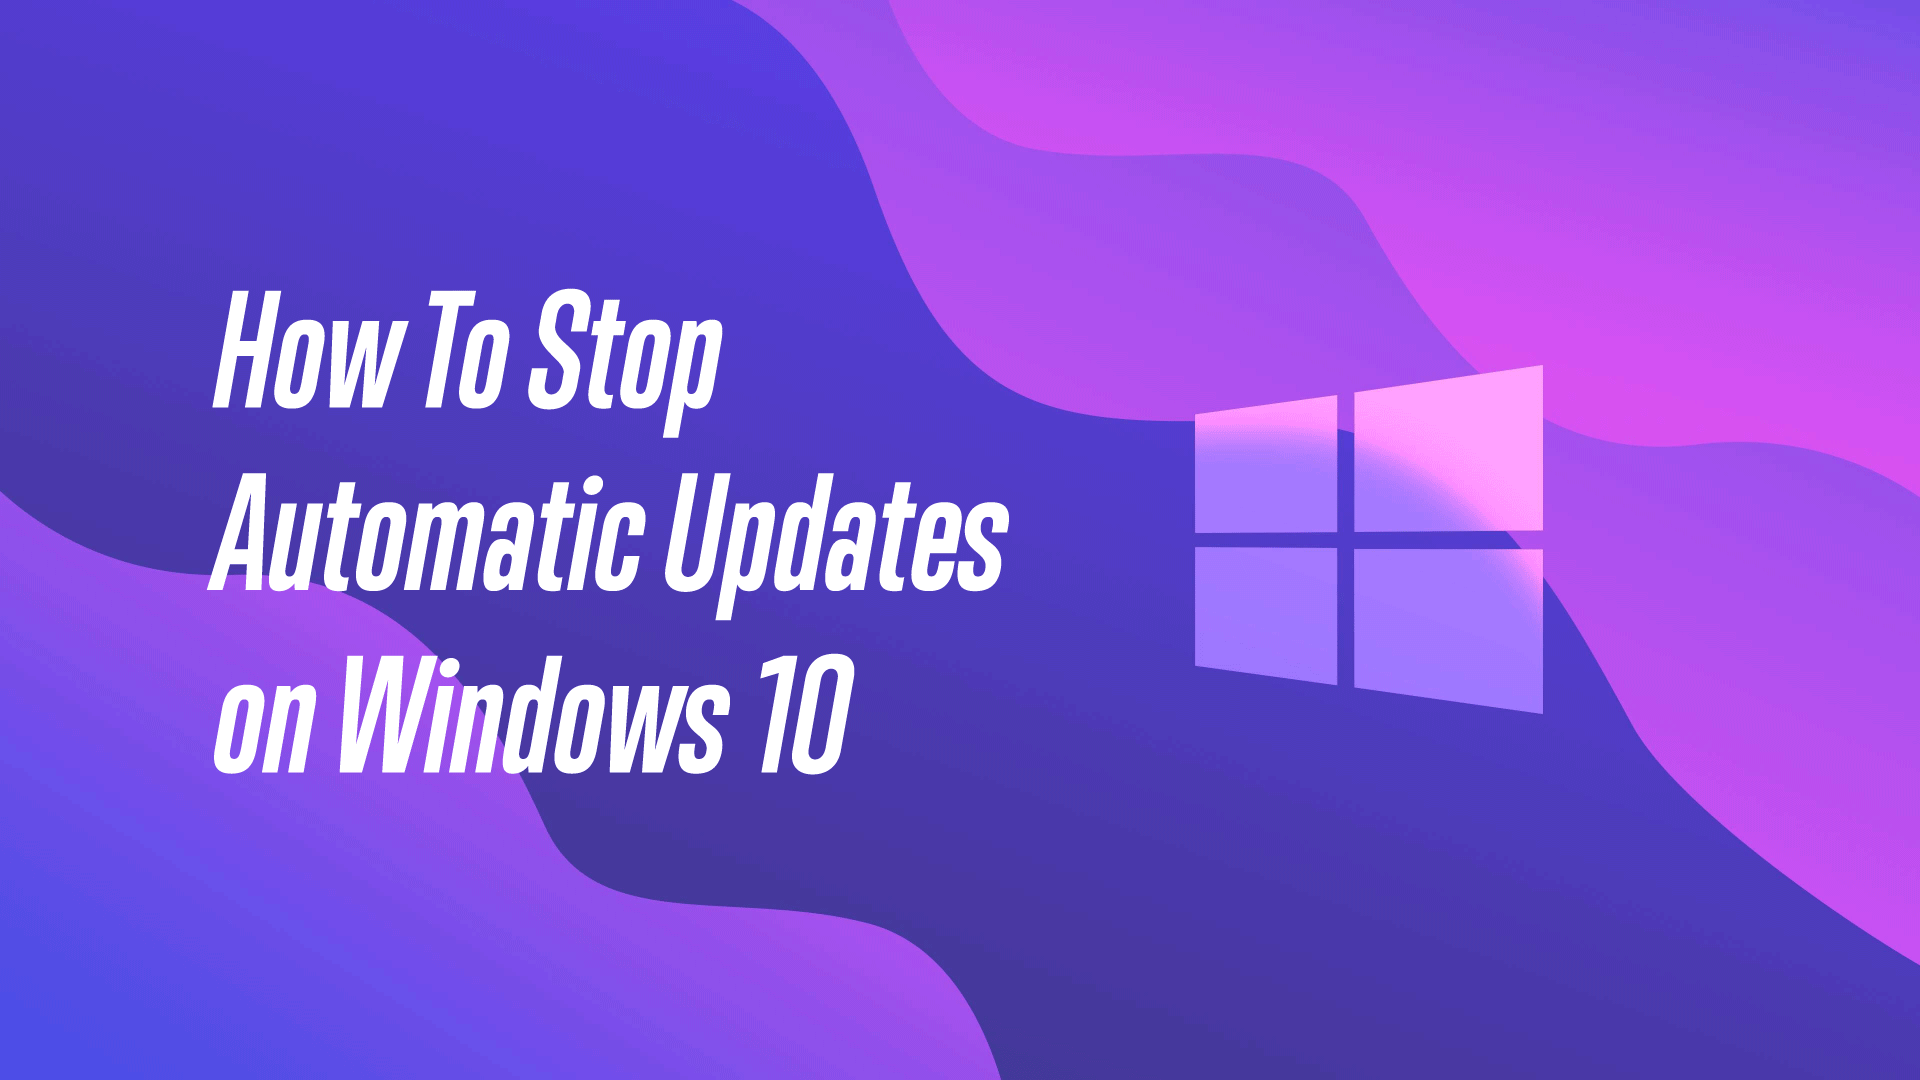 How To Disable or Stop Automatic Updates on Windows 10